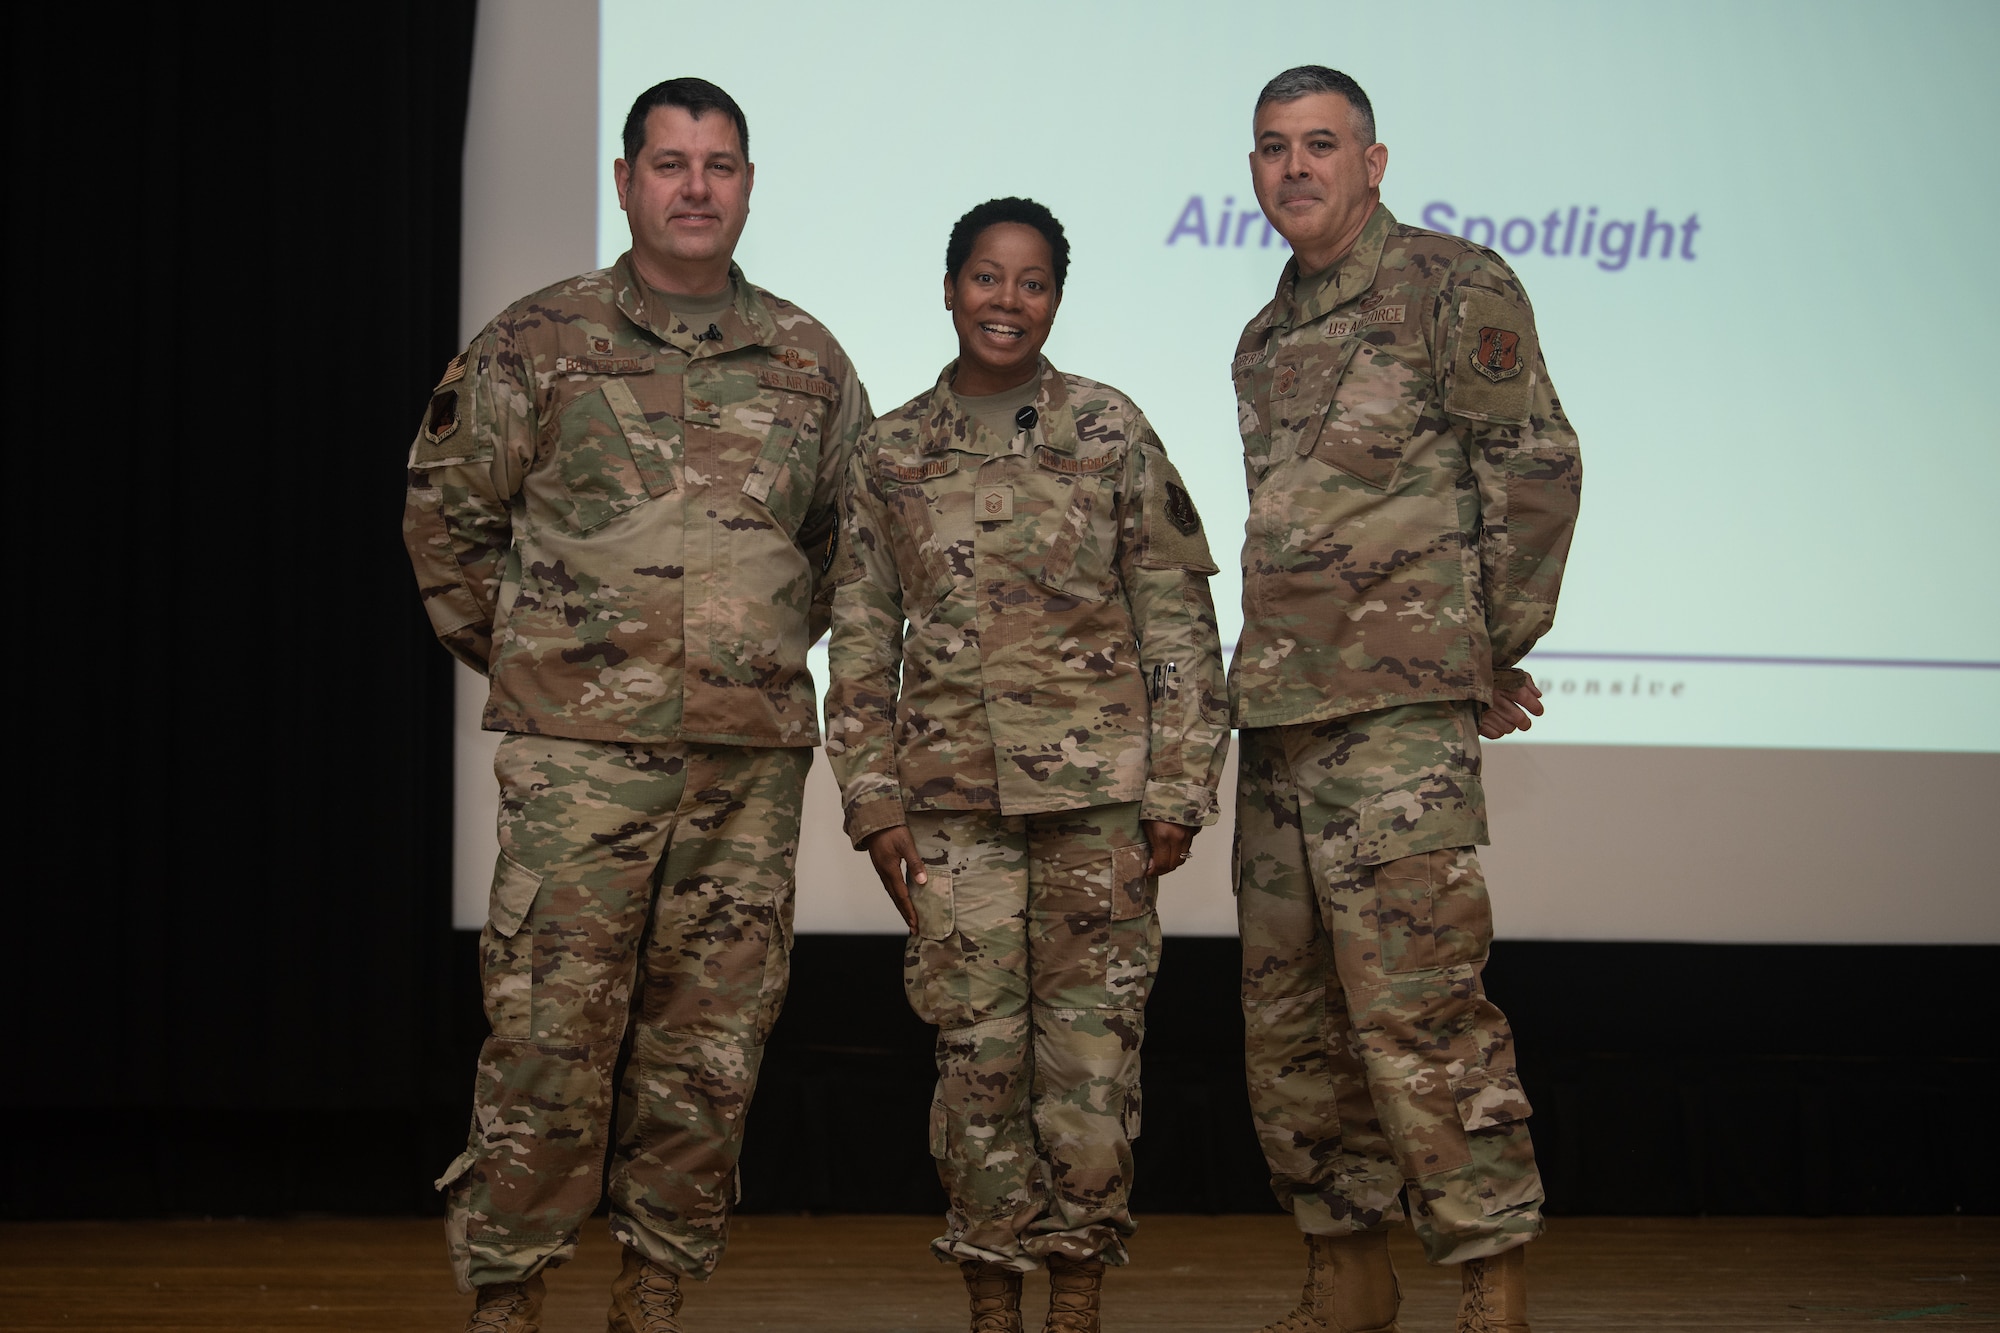 From left, Col. Christopher G. Batterton, 192nd Wing commander, Master Sgt. Clarice Thurmond, 192nd Intelligence Squadron, and Chief Master Sgt. Richard Roberts, 192nd Wing command chief, pose for a photo.